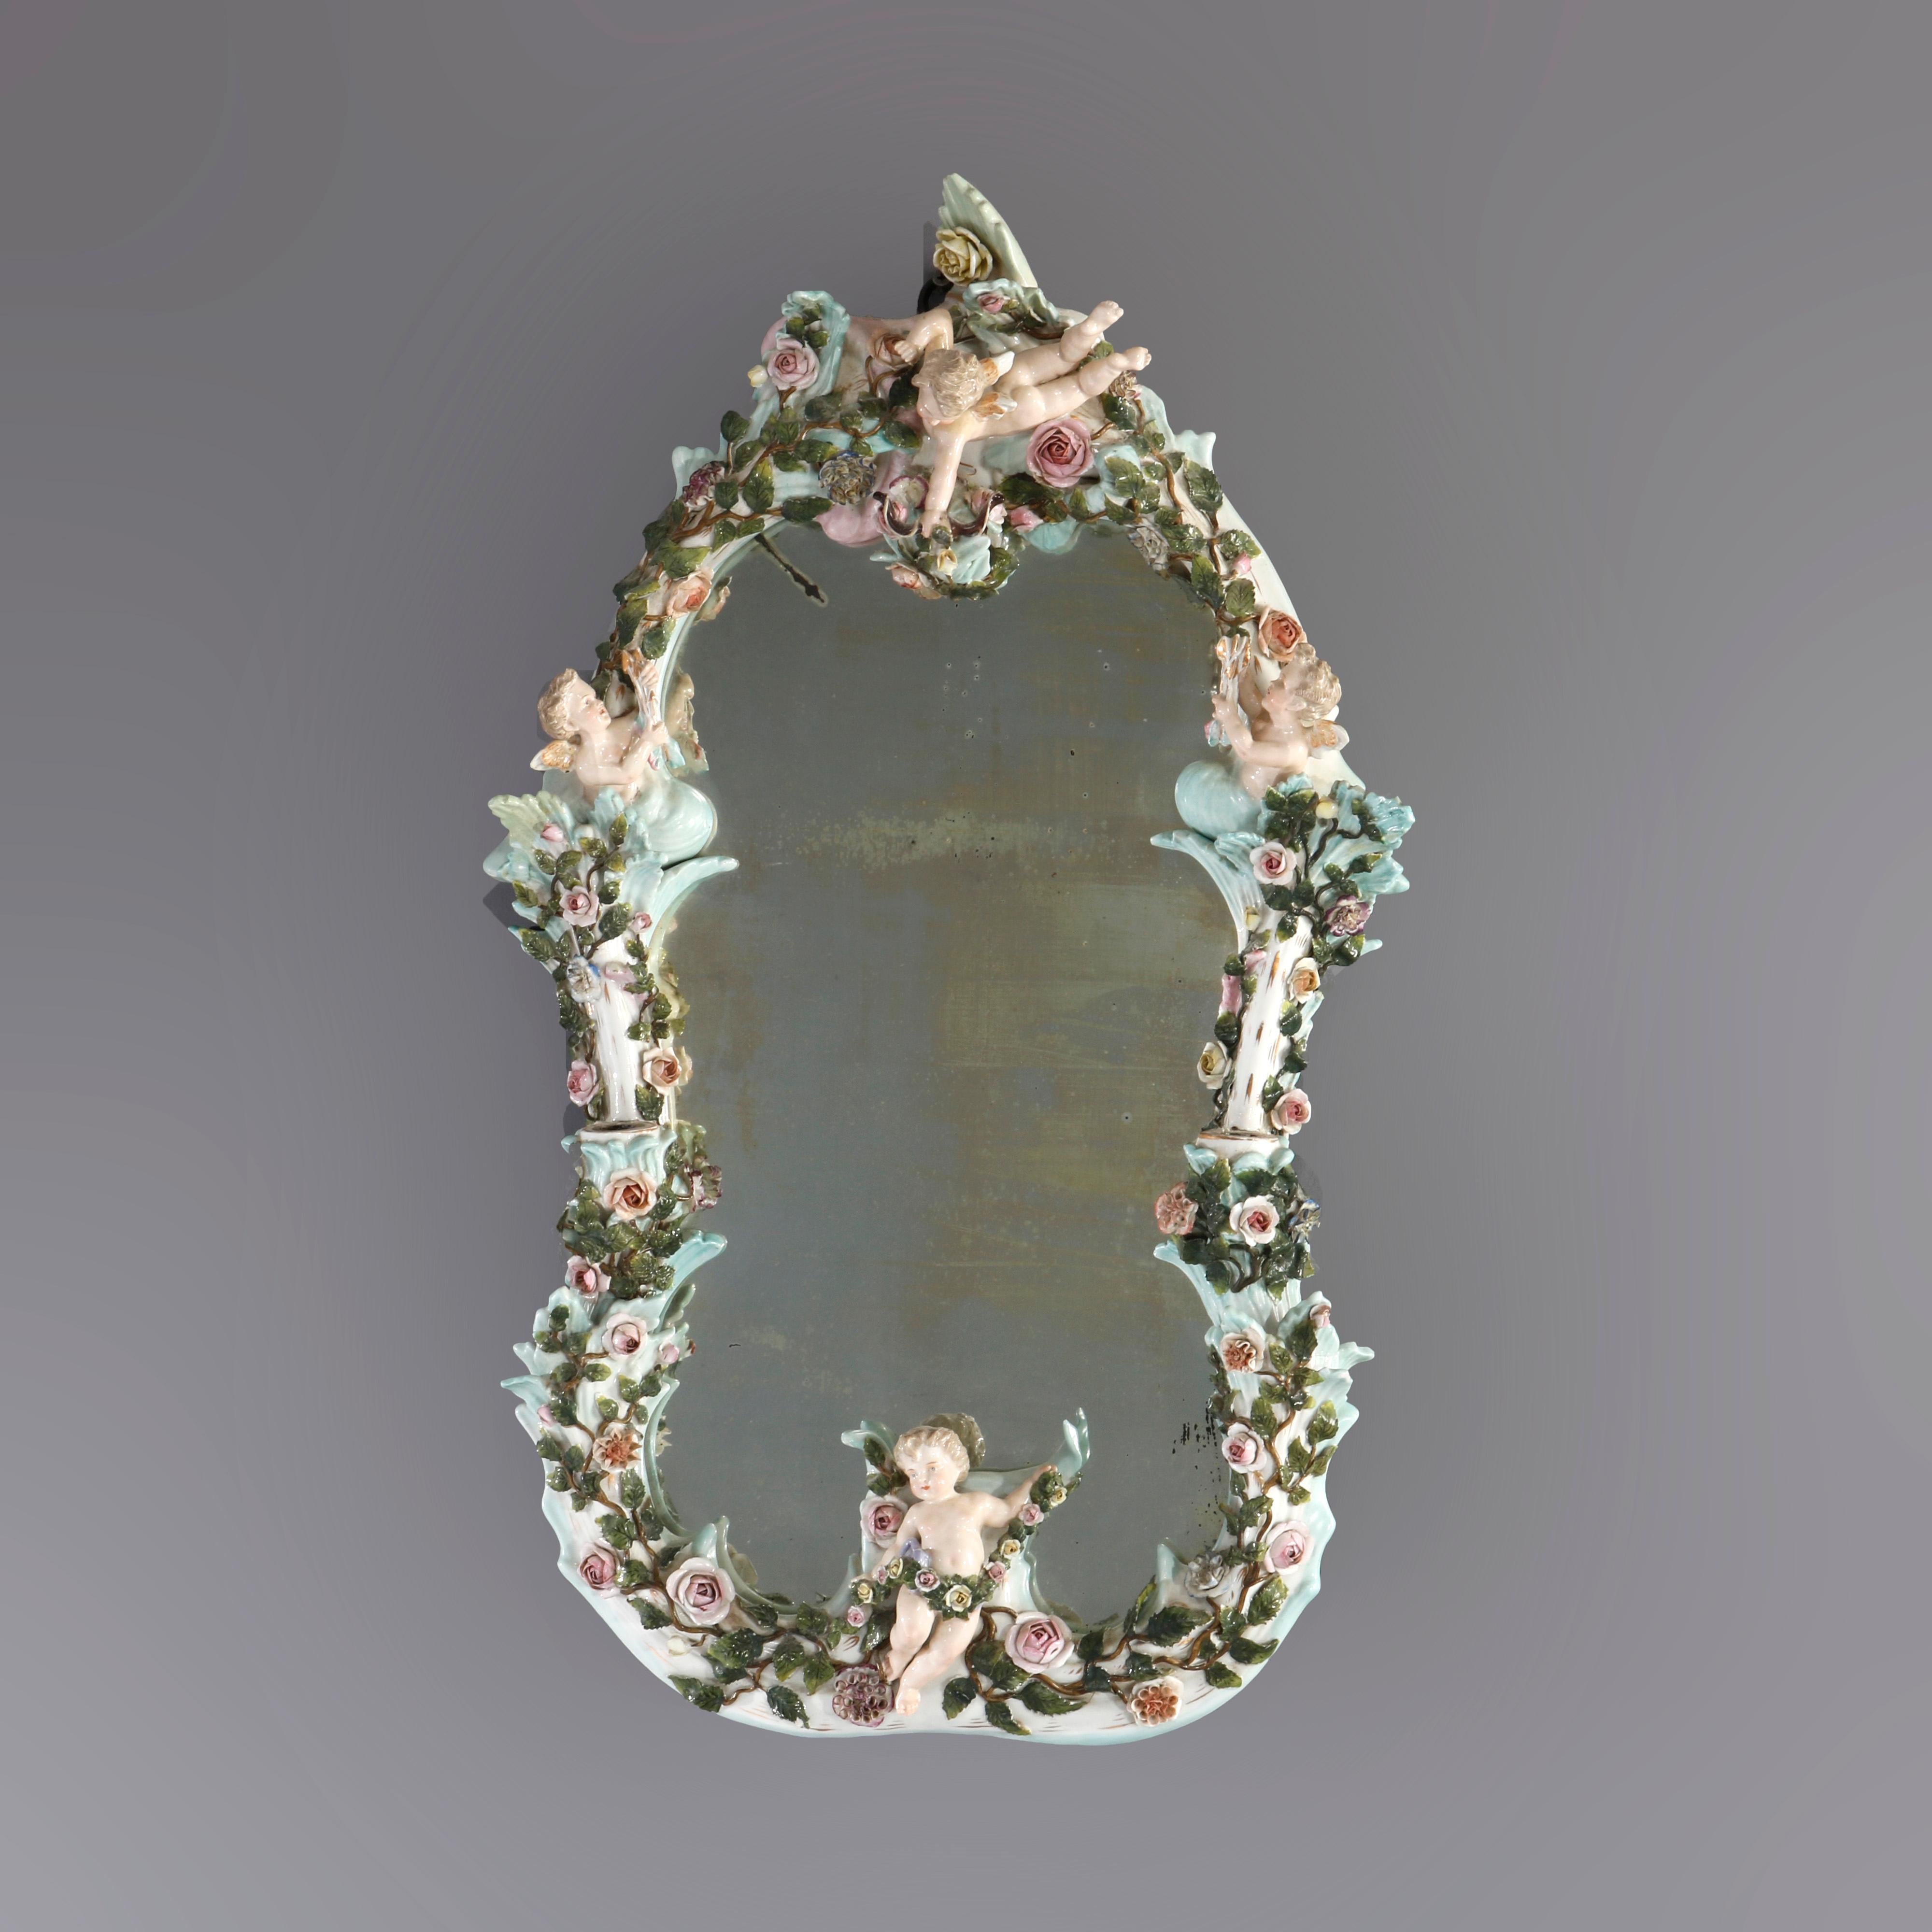 An antique large German Dresden figural wall mirror offers hand painted porcelain frame with cherubs, flowers and flanking candle sockets, 19th century

Measures - 27'' H x 16.5'' W x 4.5'' D.

Catalogue Note: Ask about DISCOUNTED DELIVERY RATES